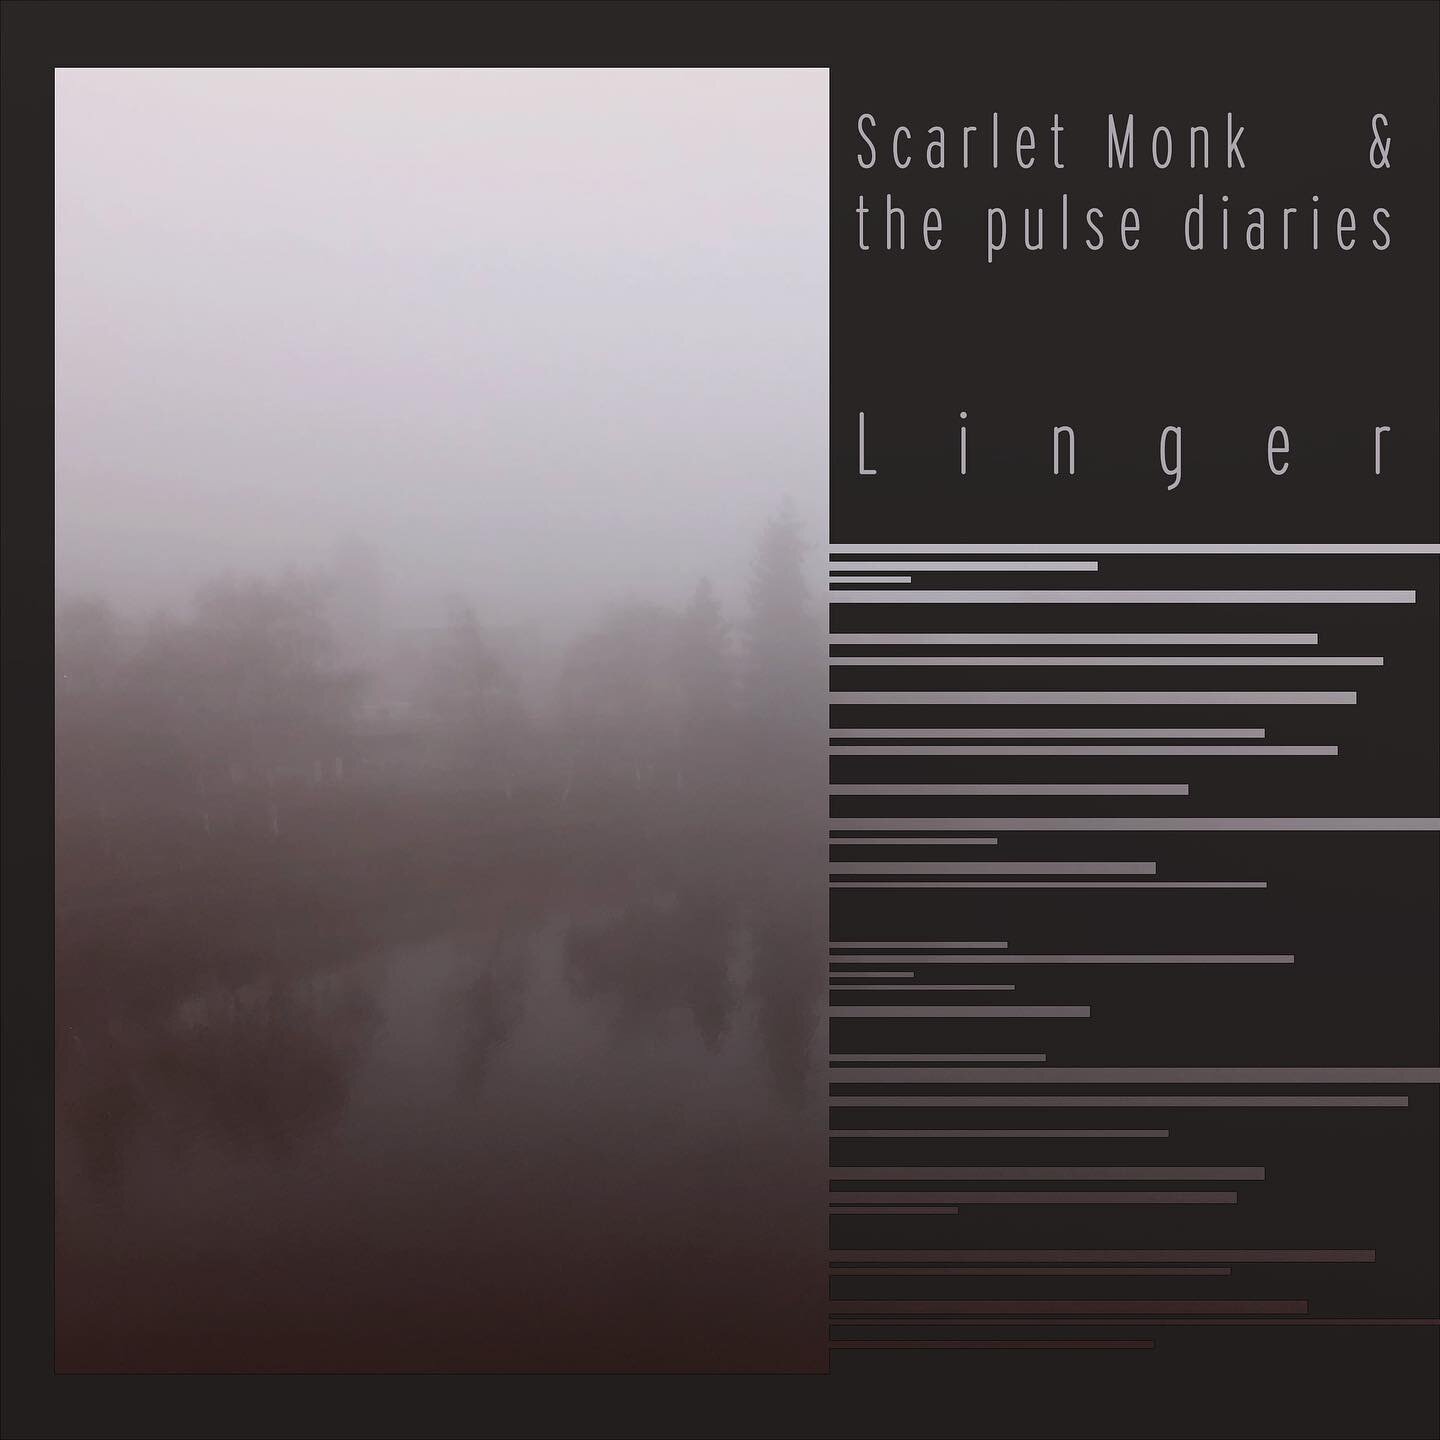 LINGER - the new collaboration album by The Pulse Diaries and Scarlet Monk (@mugsandpockets , scarletmonk.com). 
Out in all streaming platforms this Friday, January 27, 2023. 
The album cover design was by Yours Truly, and the photography was by Scar